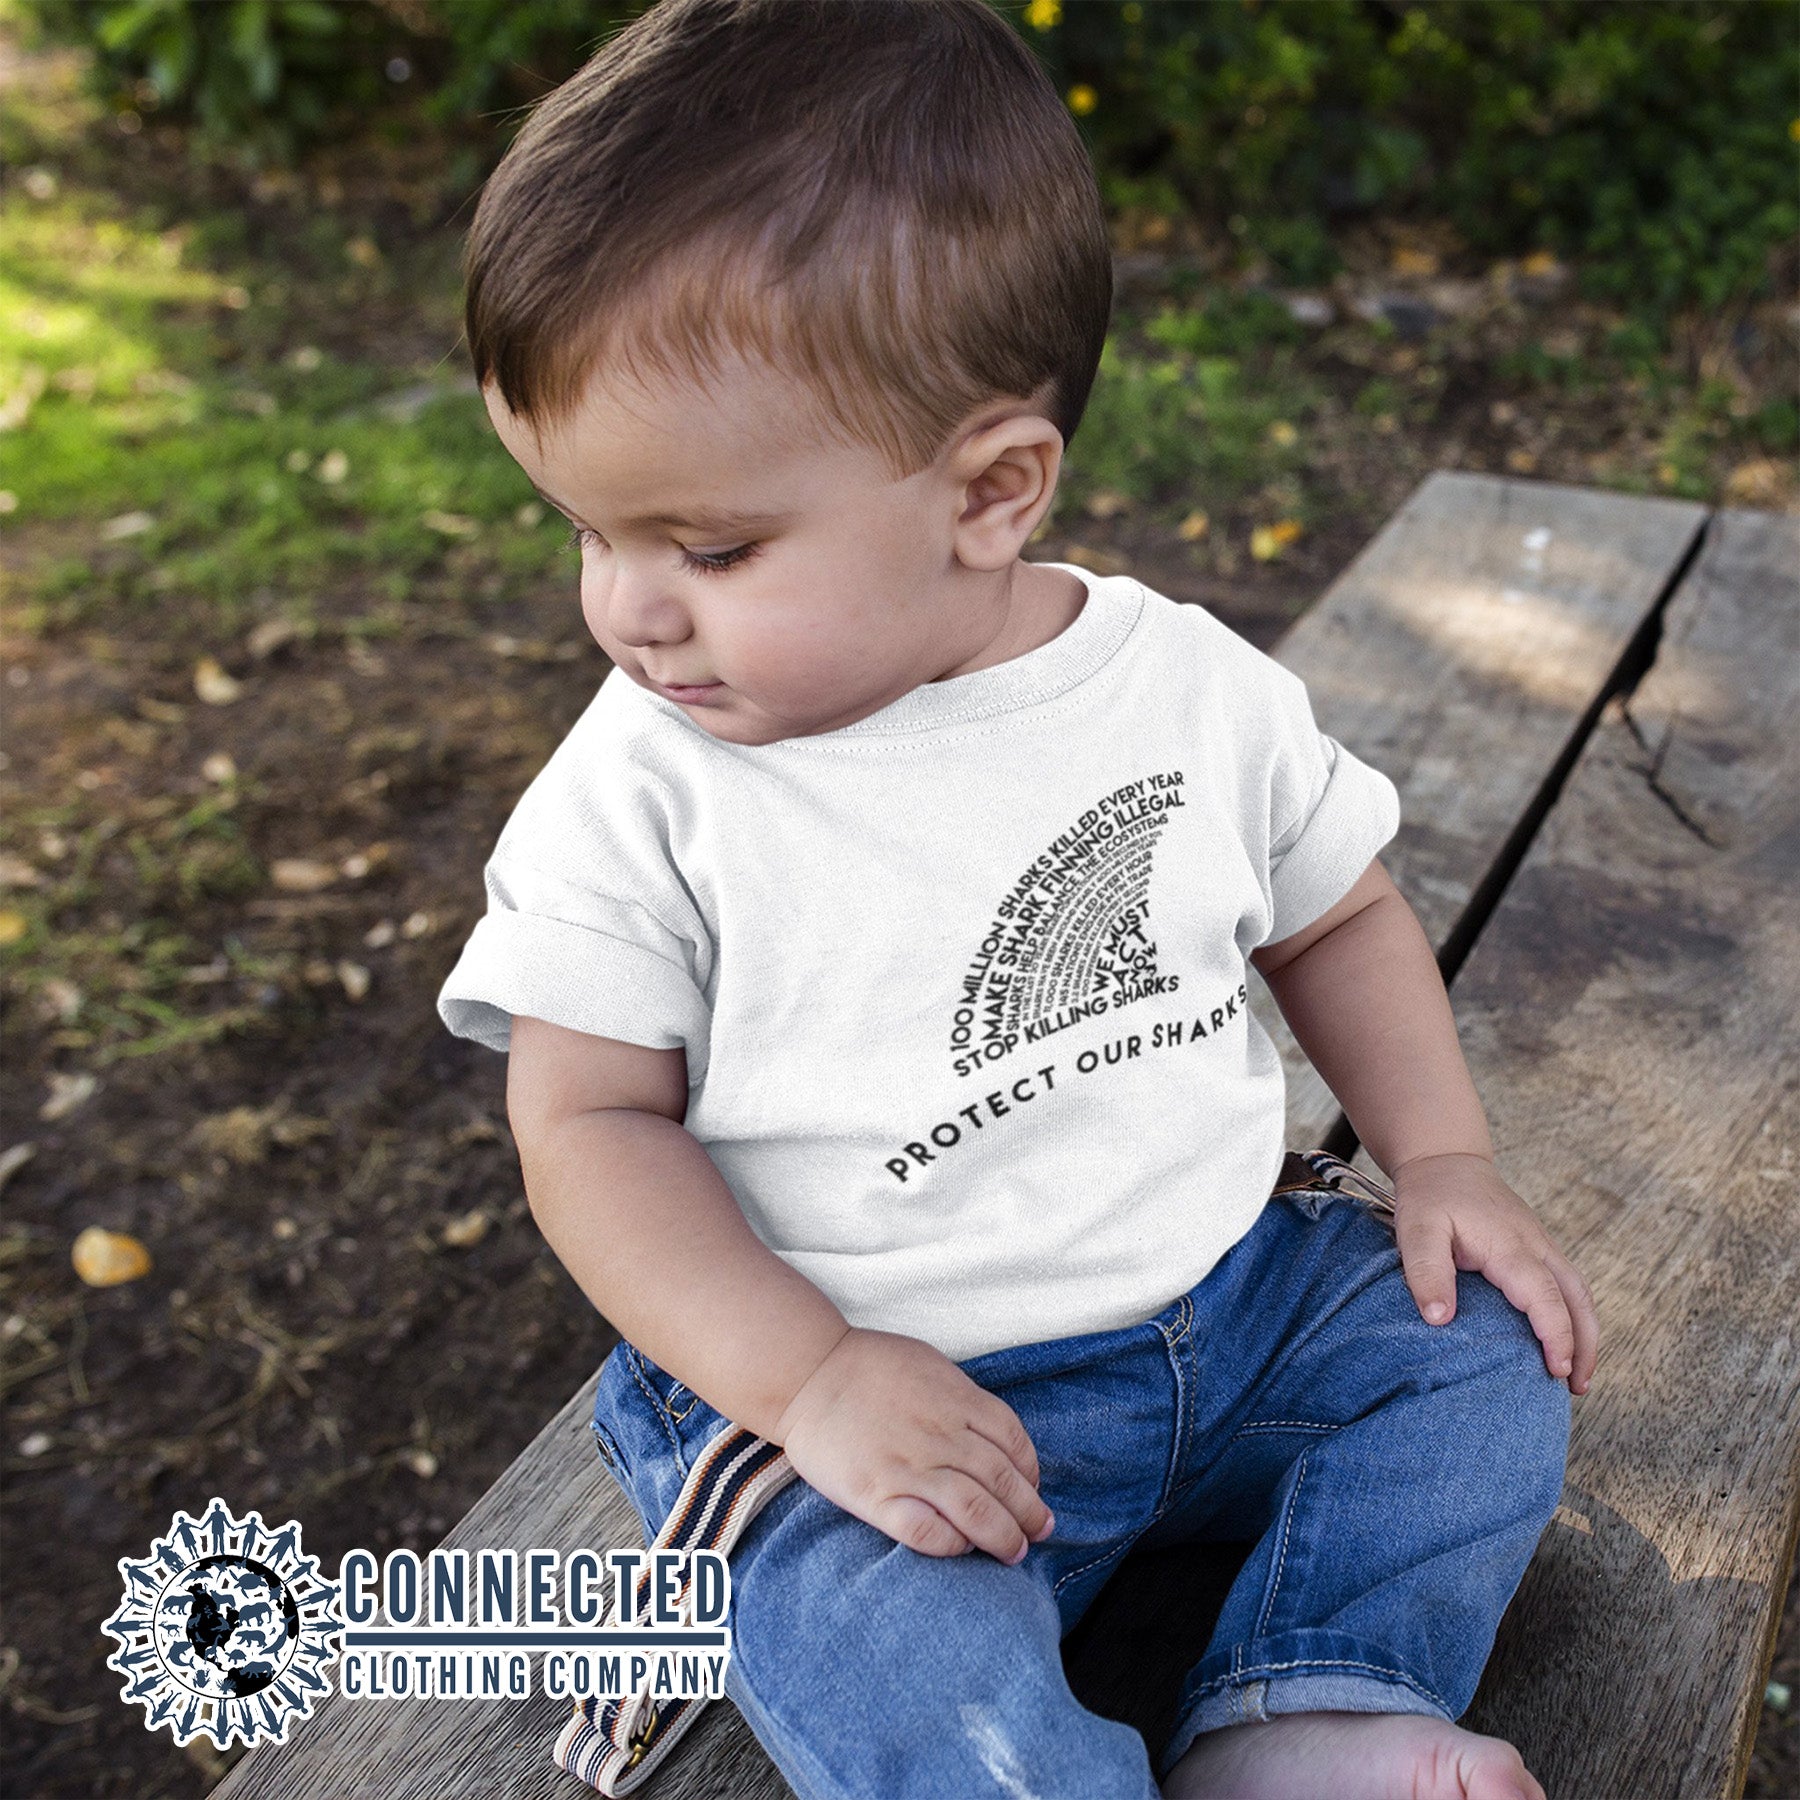 Toddler Model Wearing White Protect Our Sharks Toddler Short-Sleeve Tee - Connected Clothing Company - 10% of profits donated to Oceana shark conservation